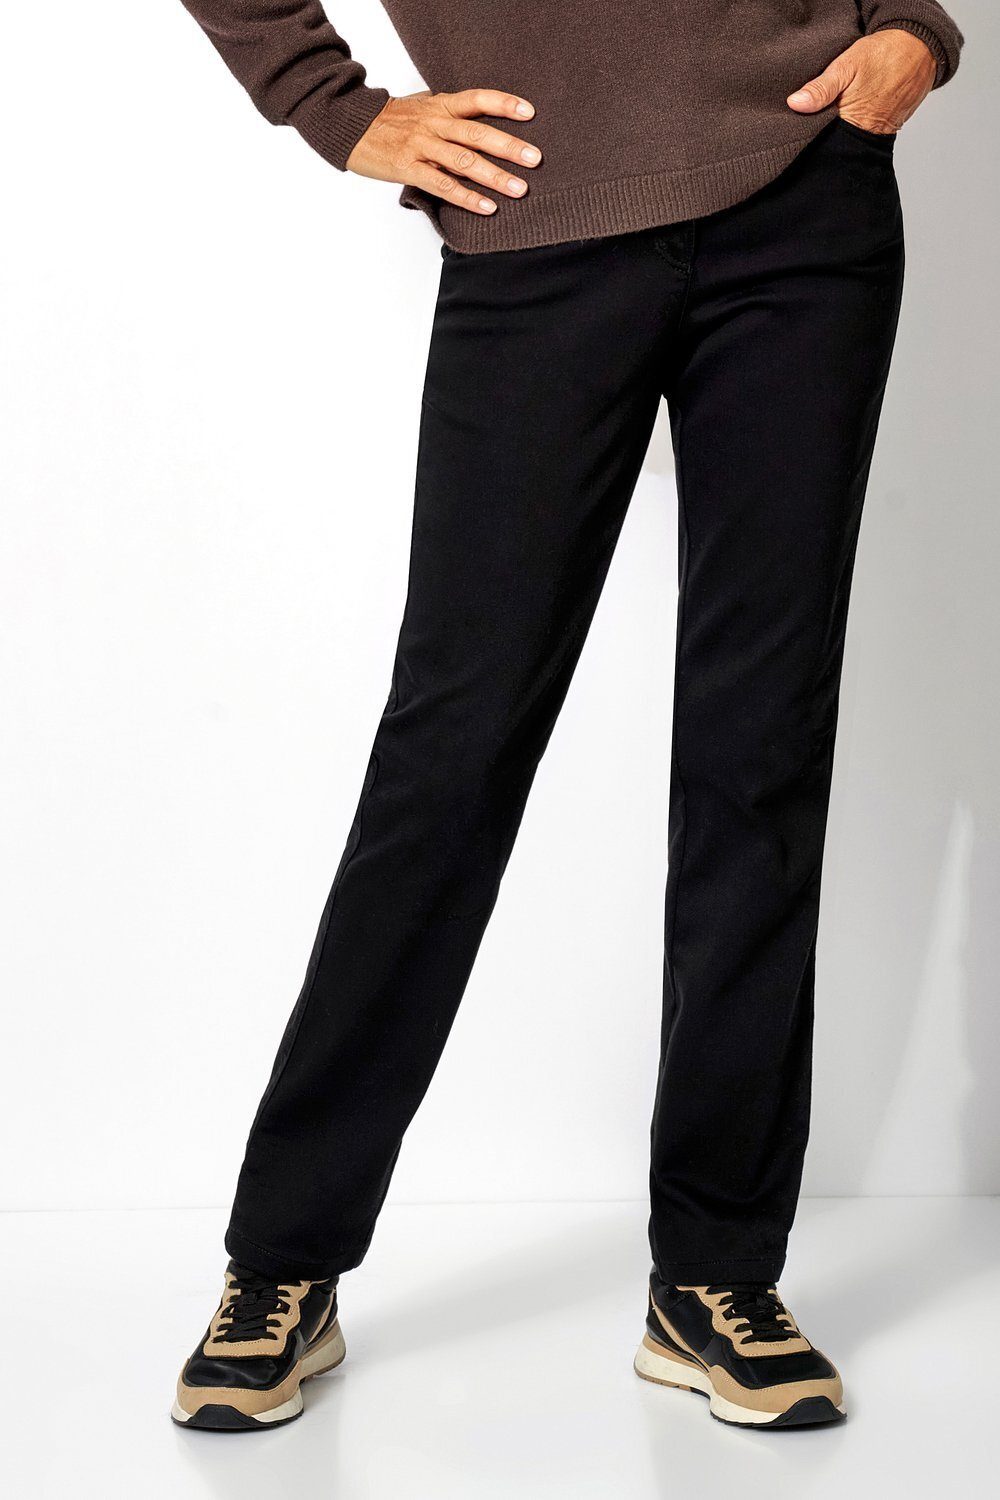 - legerer Love My by TONI 891 schwarz Passform Relaxed 5-Pocket-Hose in